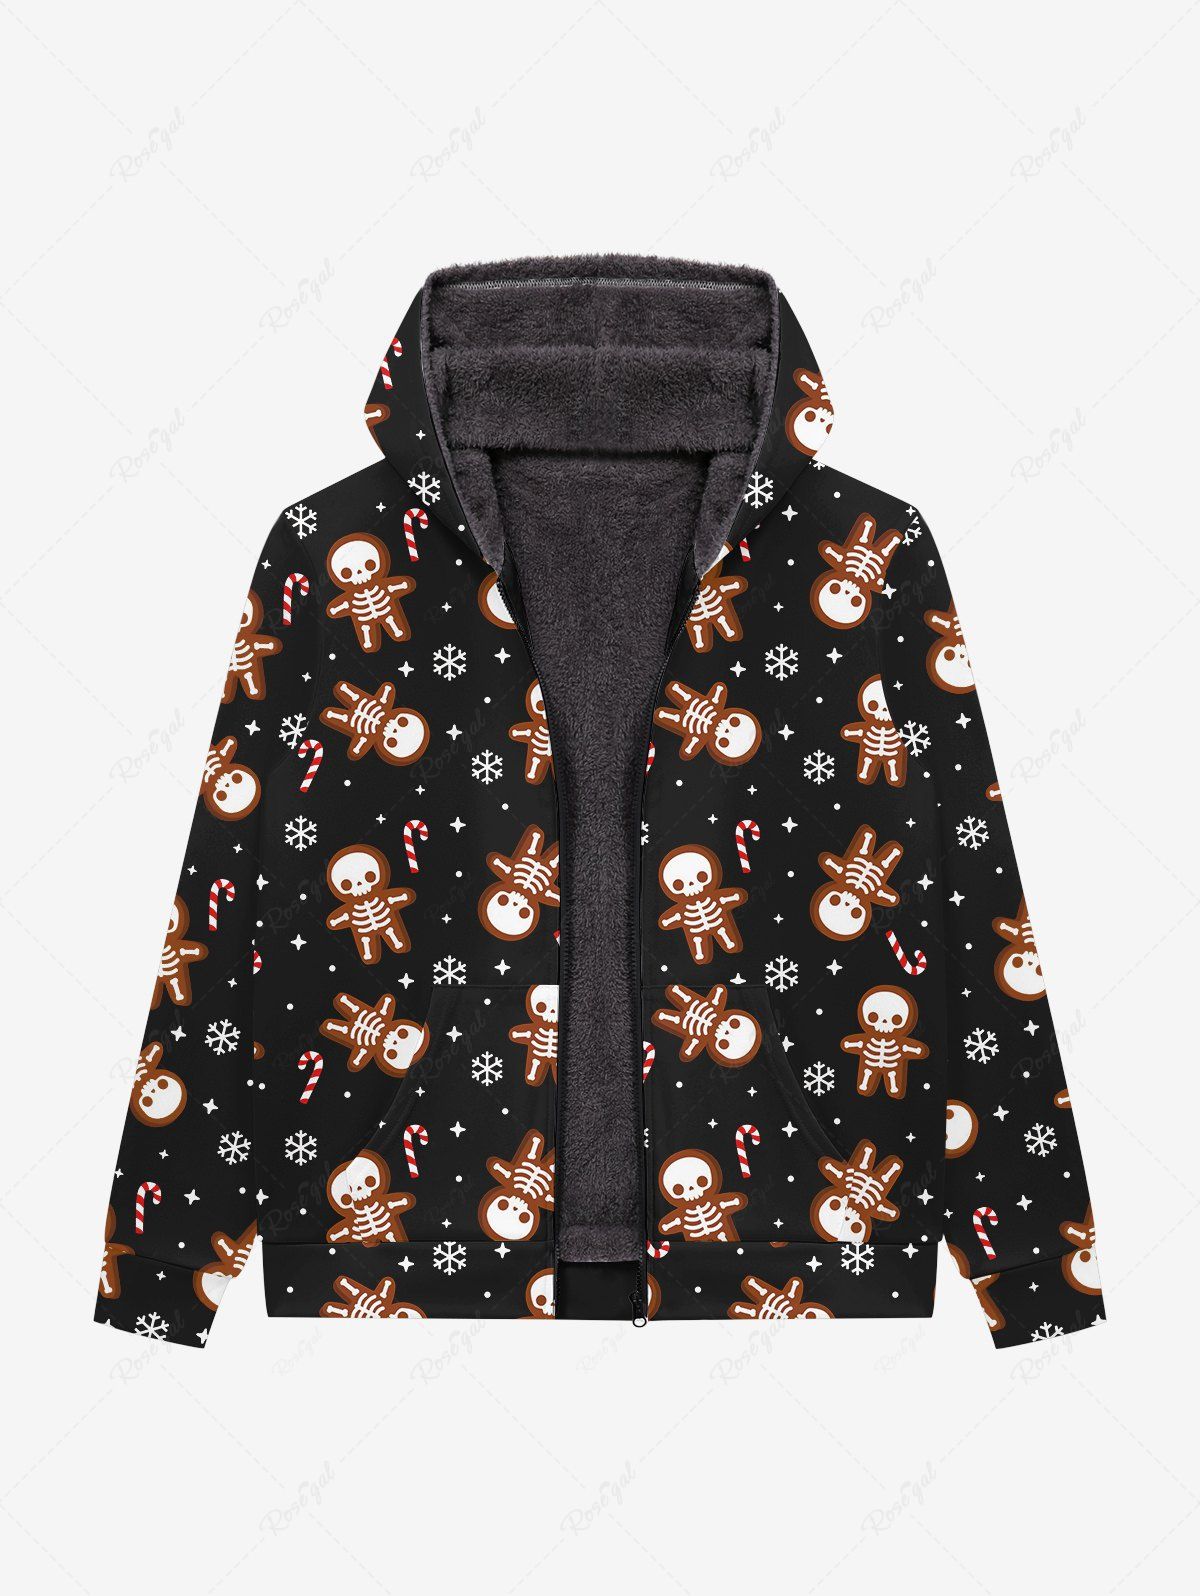 New Gothic Christmas Gingerbread Man Skeleton Skull Candy Snowflake Star Print Zip Up Pockets Fleece Lining Hoodie For Men  